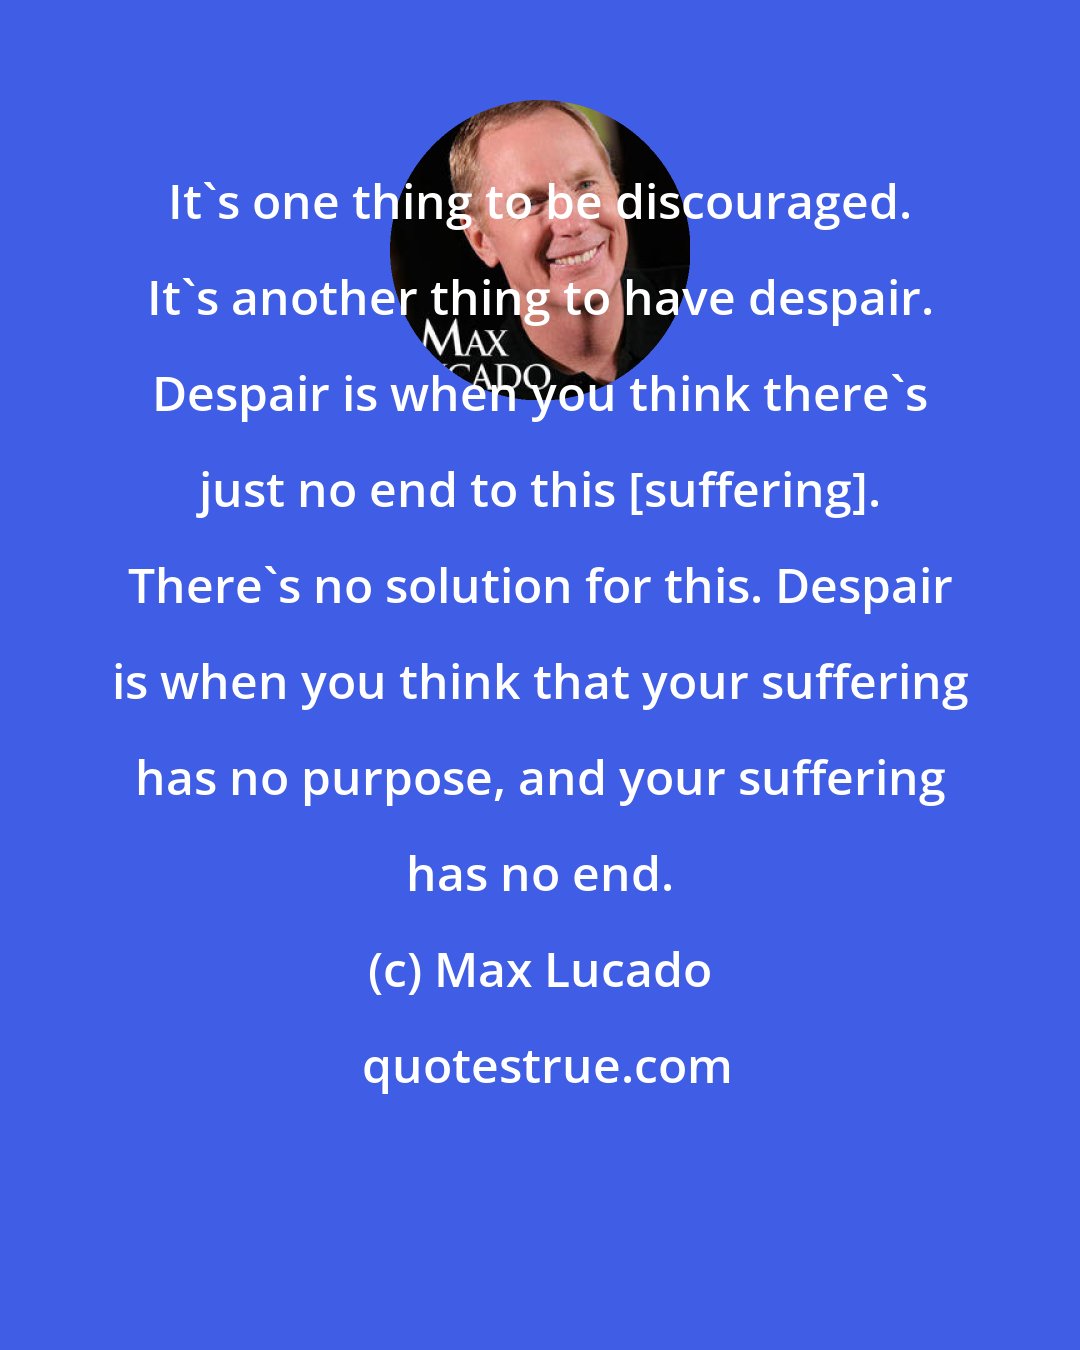 Max Lucado: It's one thing to be discouraged. It's another thing to have despair. Despair is when you think there's just no end to this [suffering]. There's no solution for this. Despair is when you think that your suffering has no purpose, and your suffering has no end.